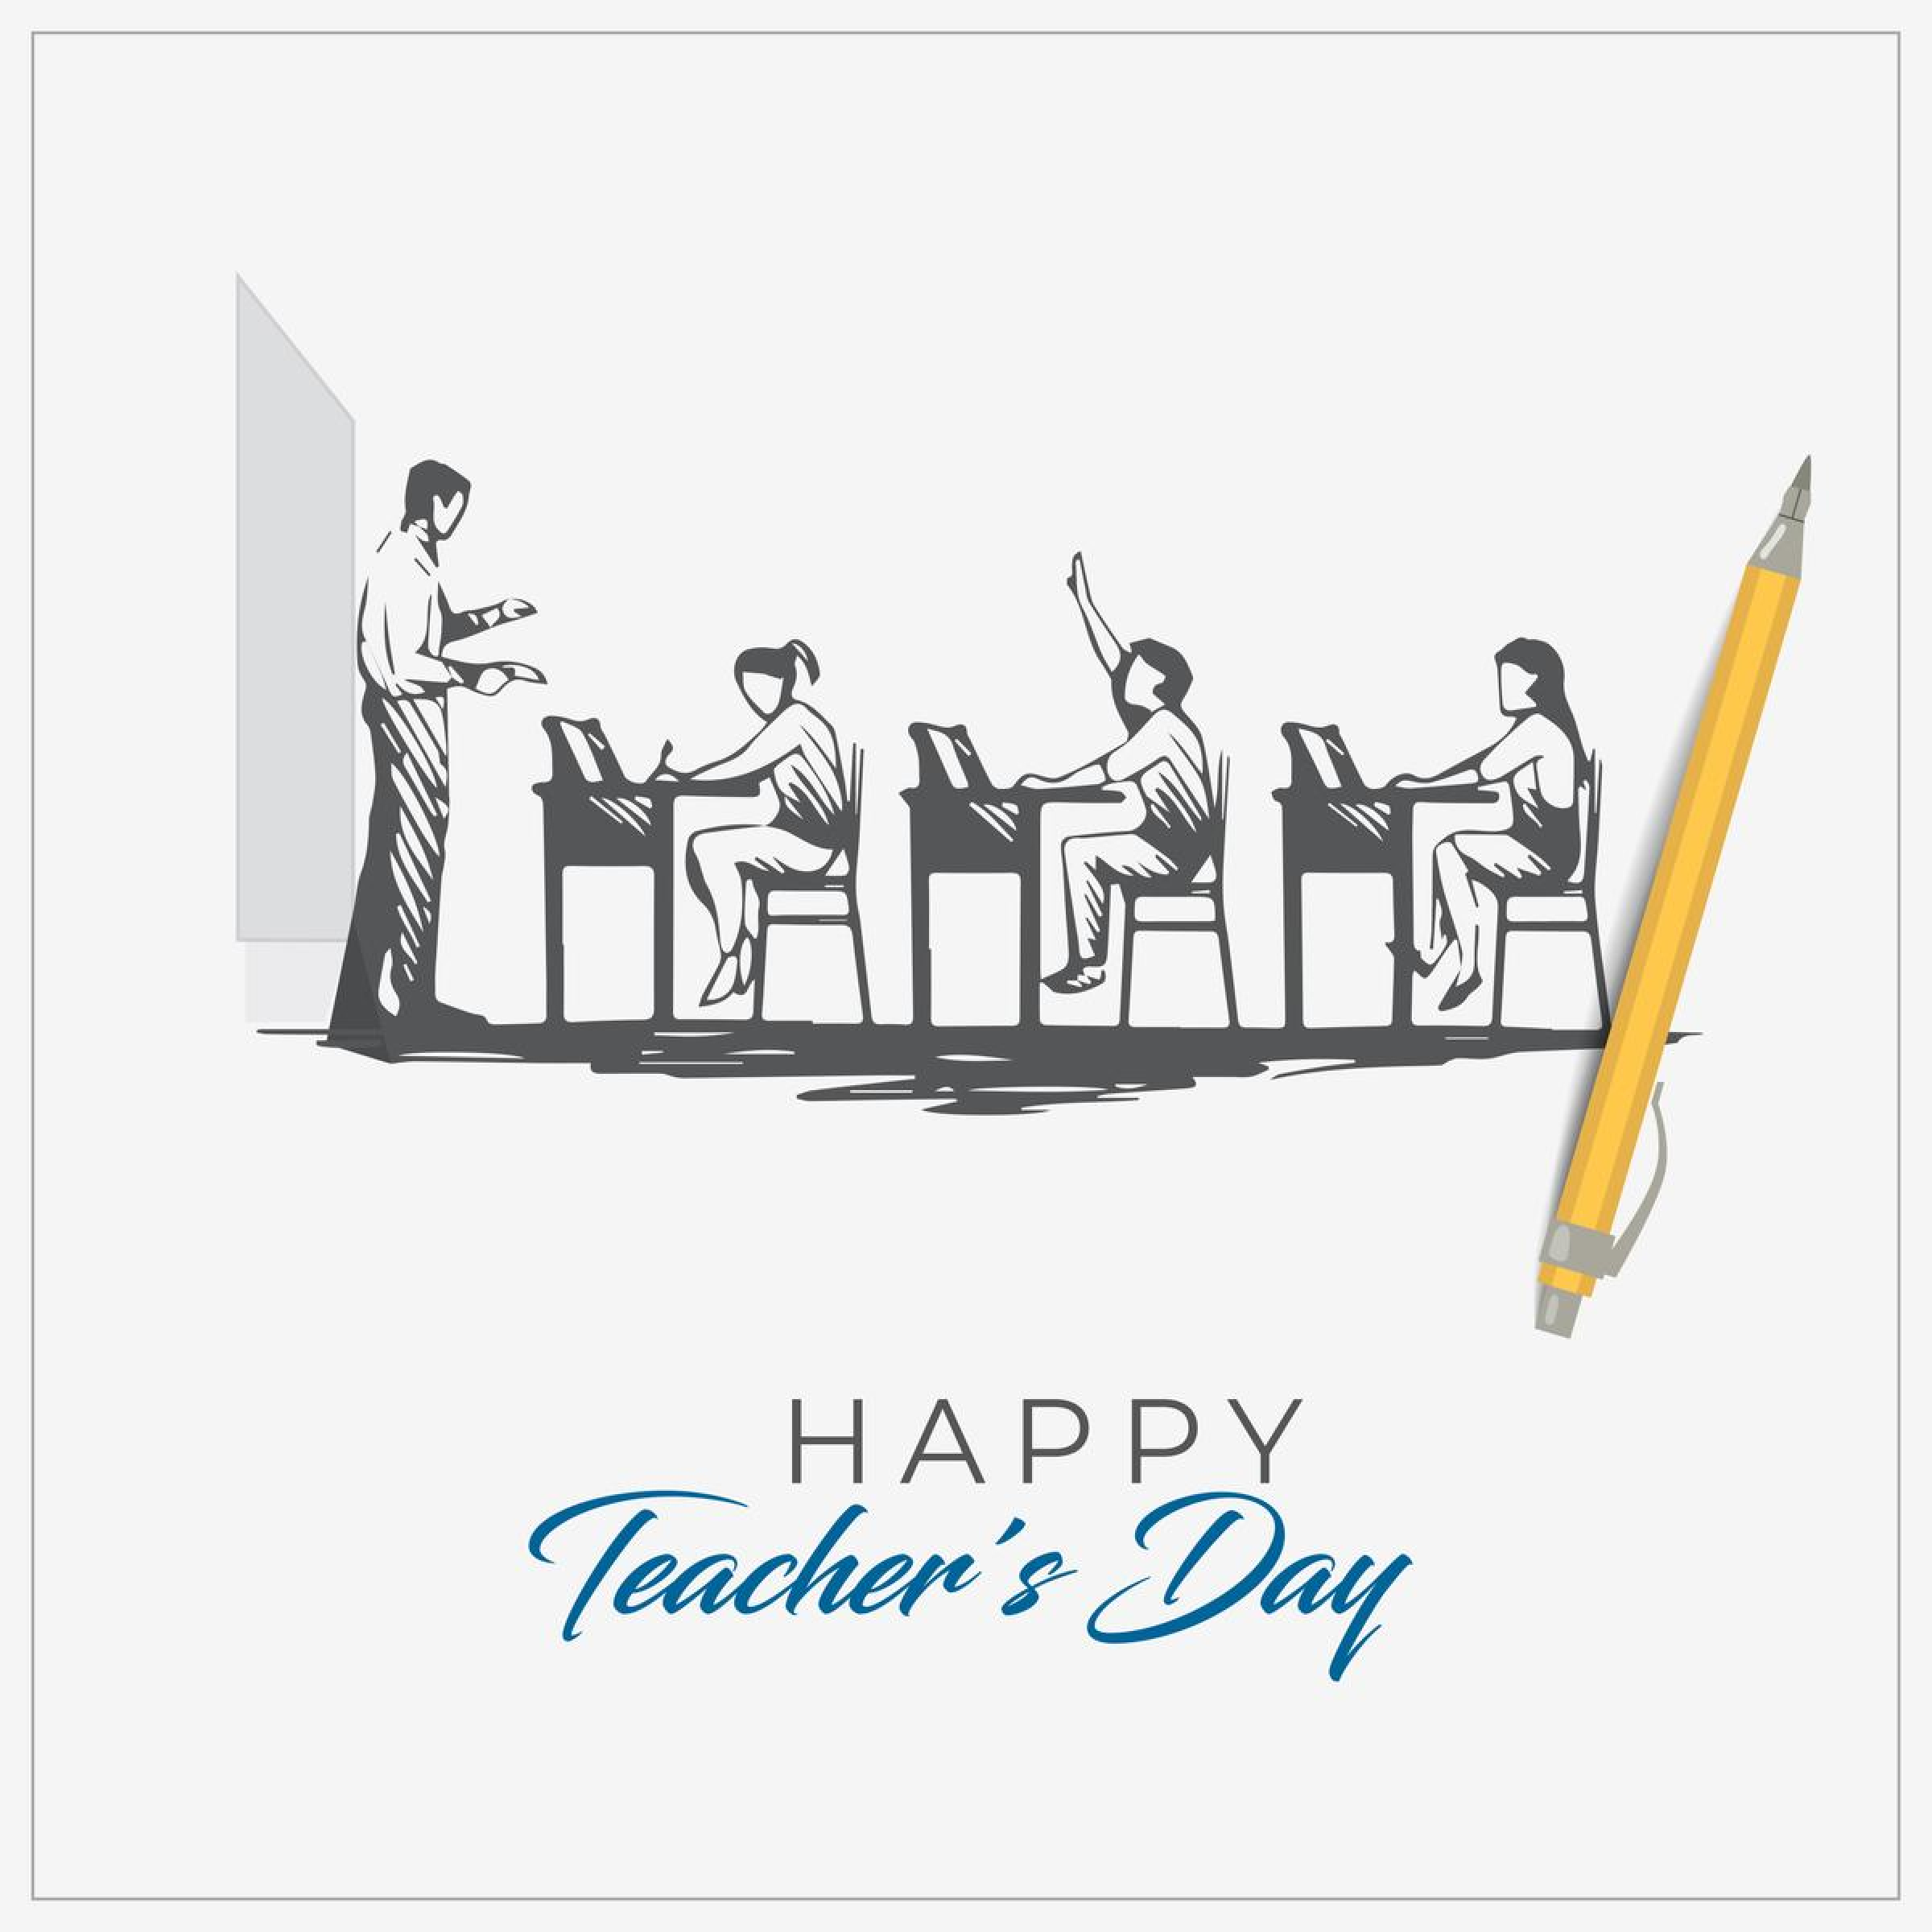 Happy Teachers' Day! - 03 - Greeting Cards for Kids | Mocomi